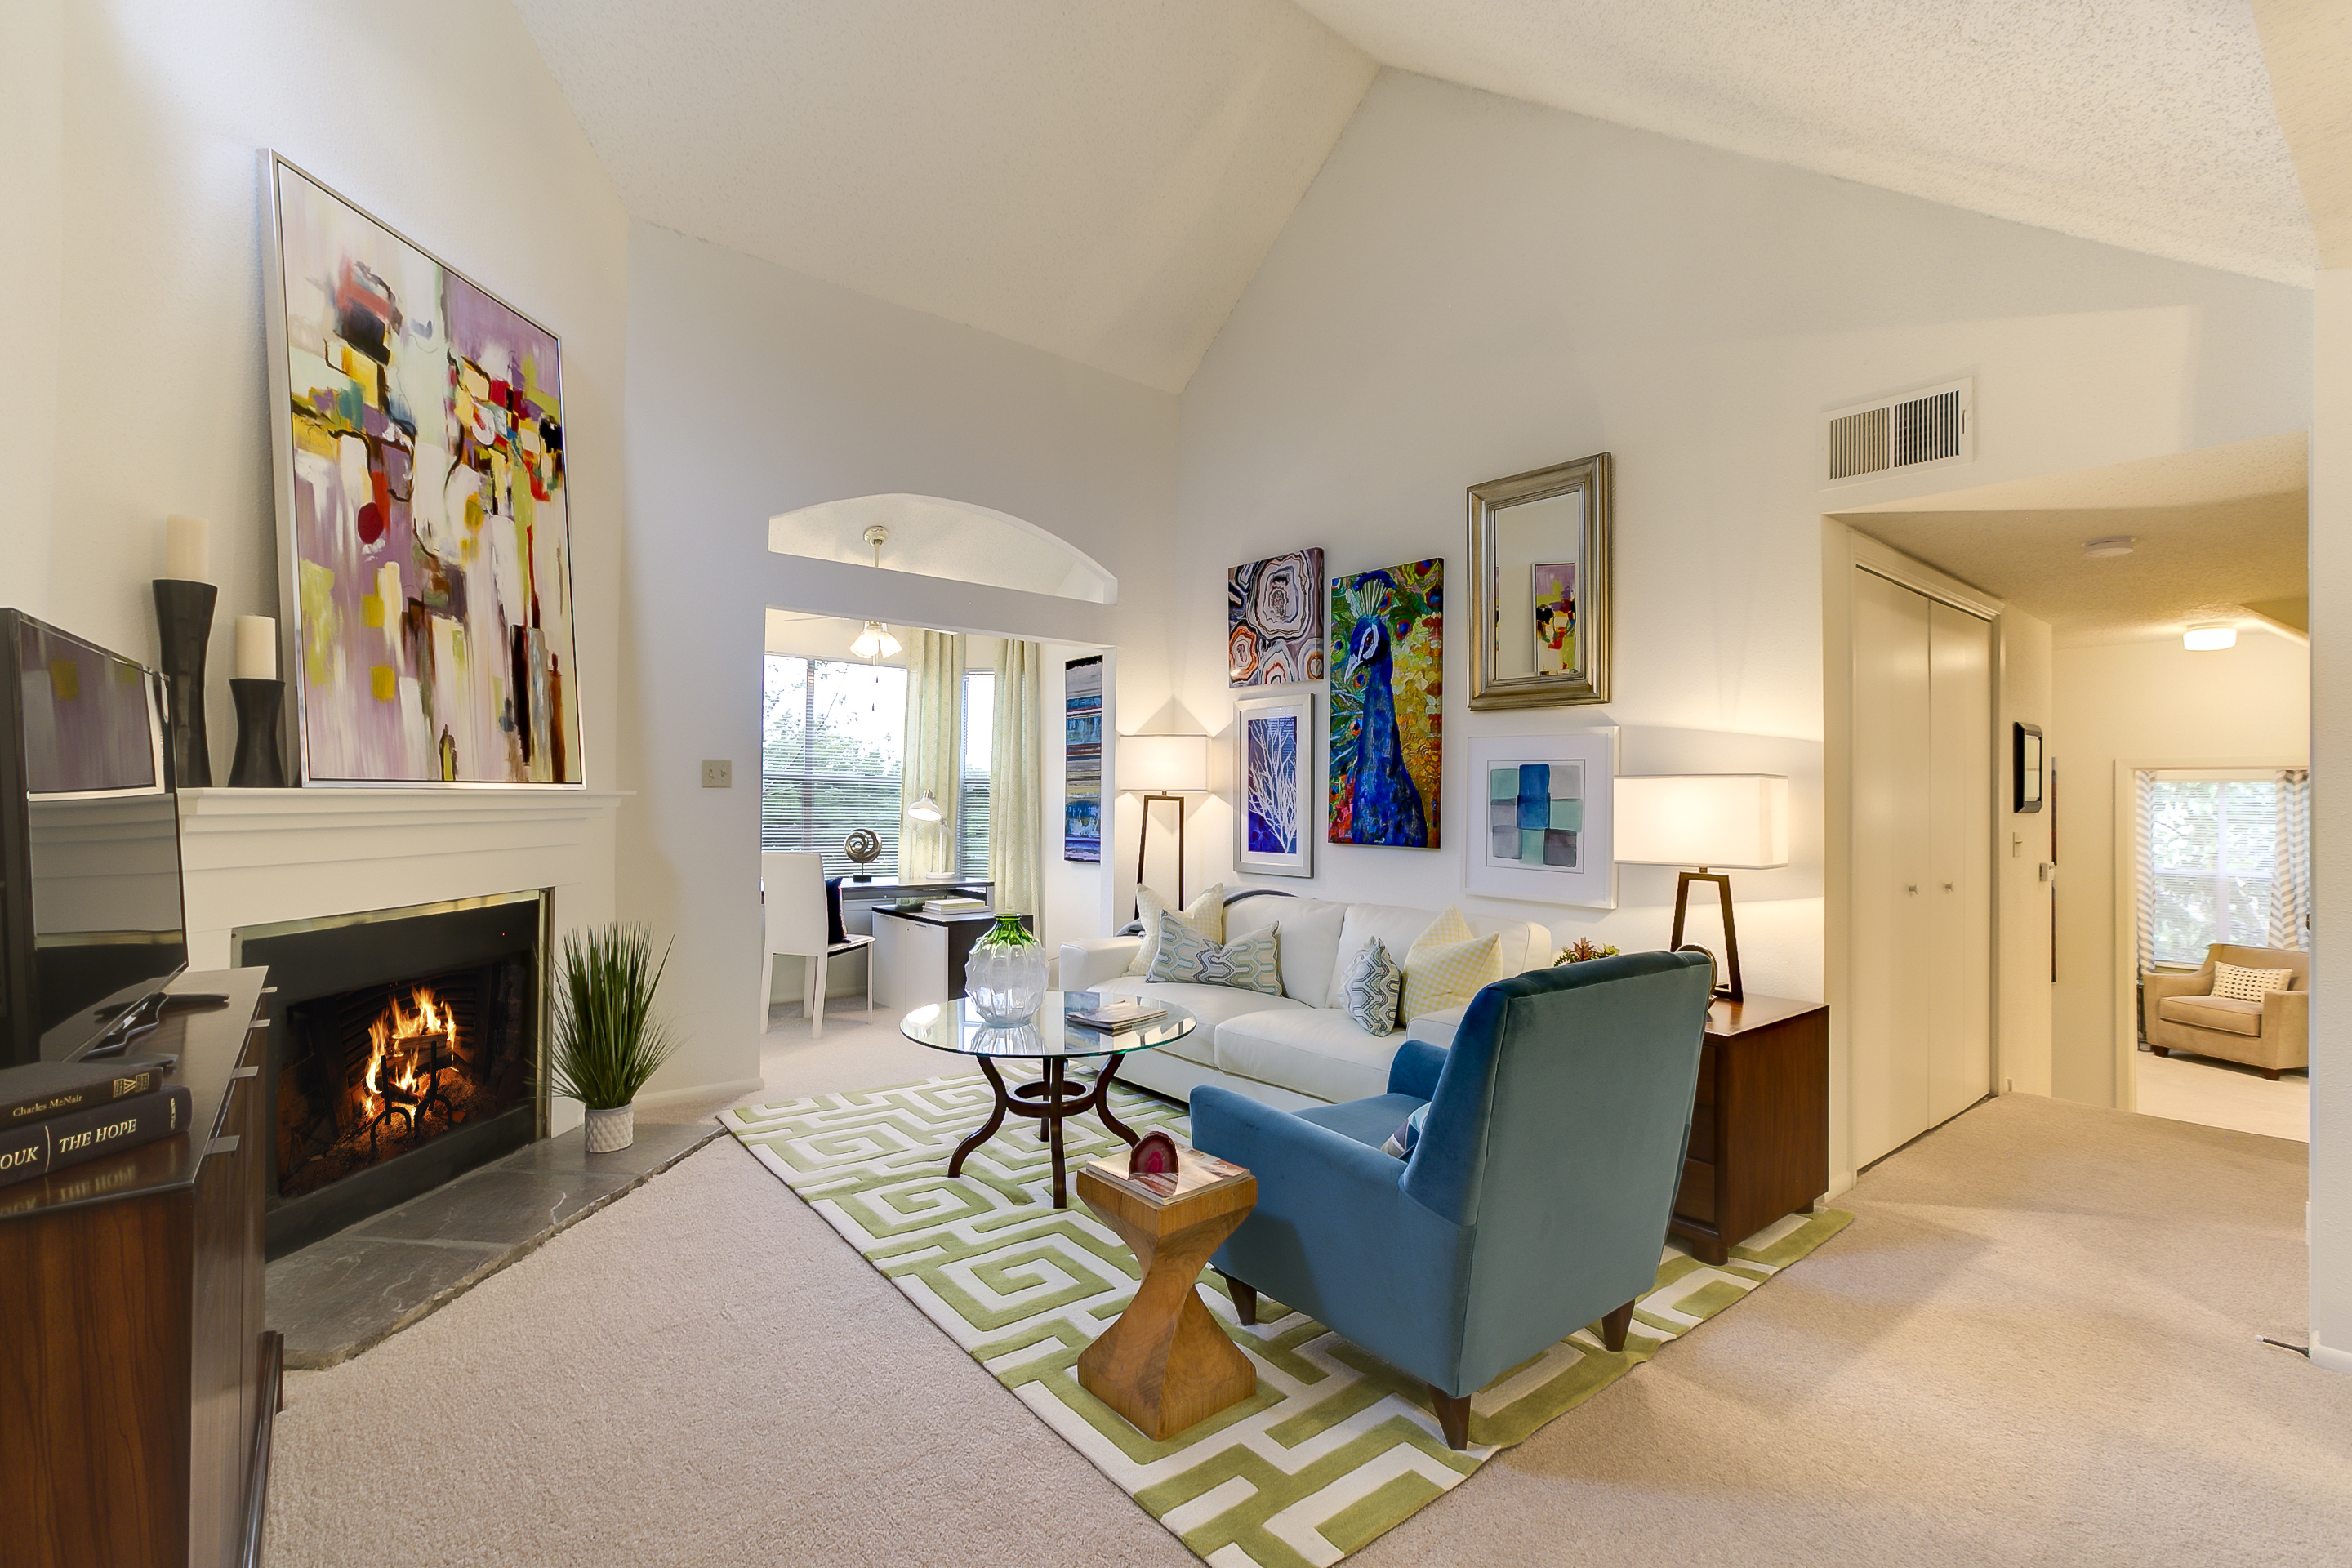 An airy yet cozy room at Citrus Creek West. 